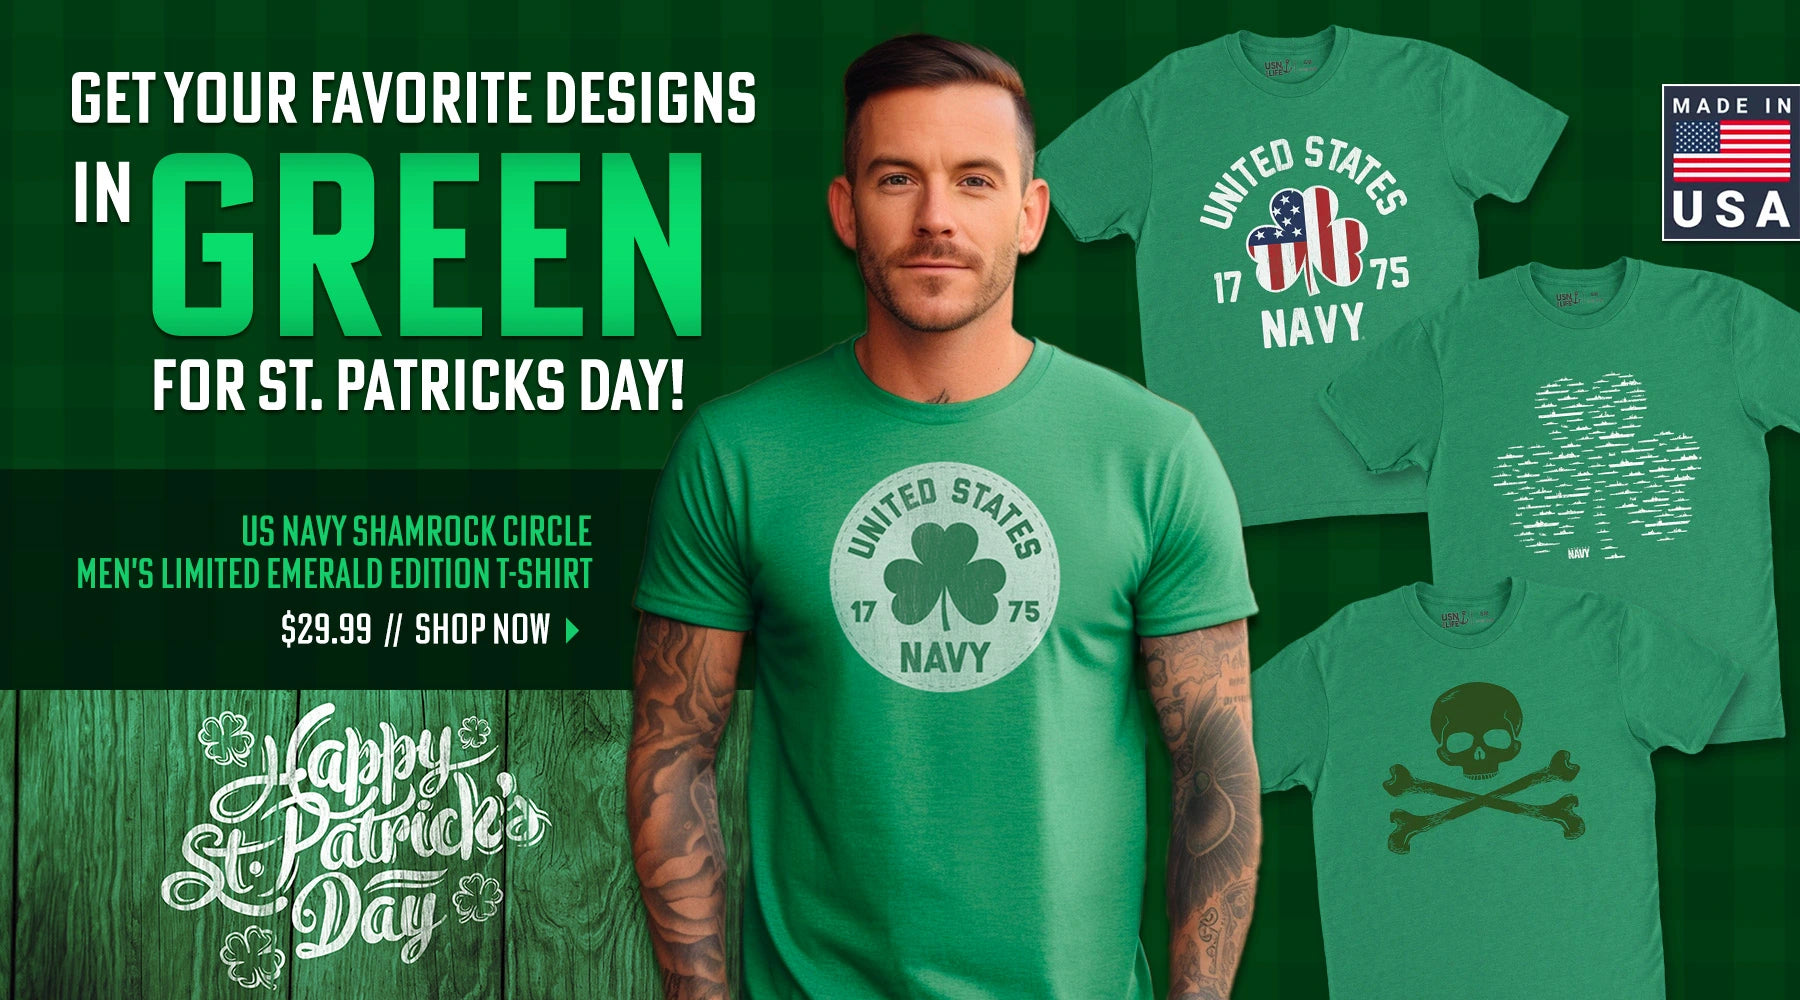 Get Your Favorite Designs In Green For St. Patricks Day! US Navy Shamrock Circle Men's Limited Emerald Edition T-Shirt. $29.99 Shop Now